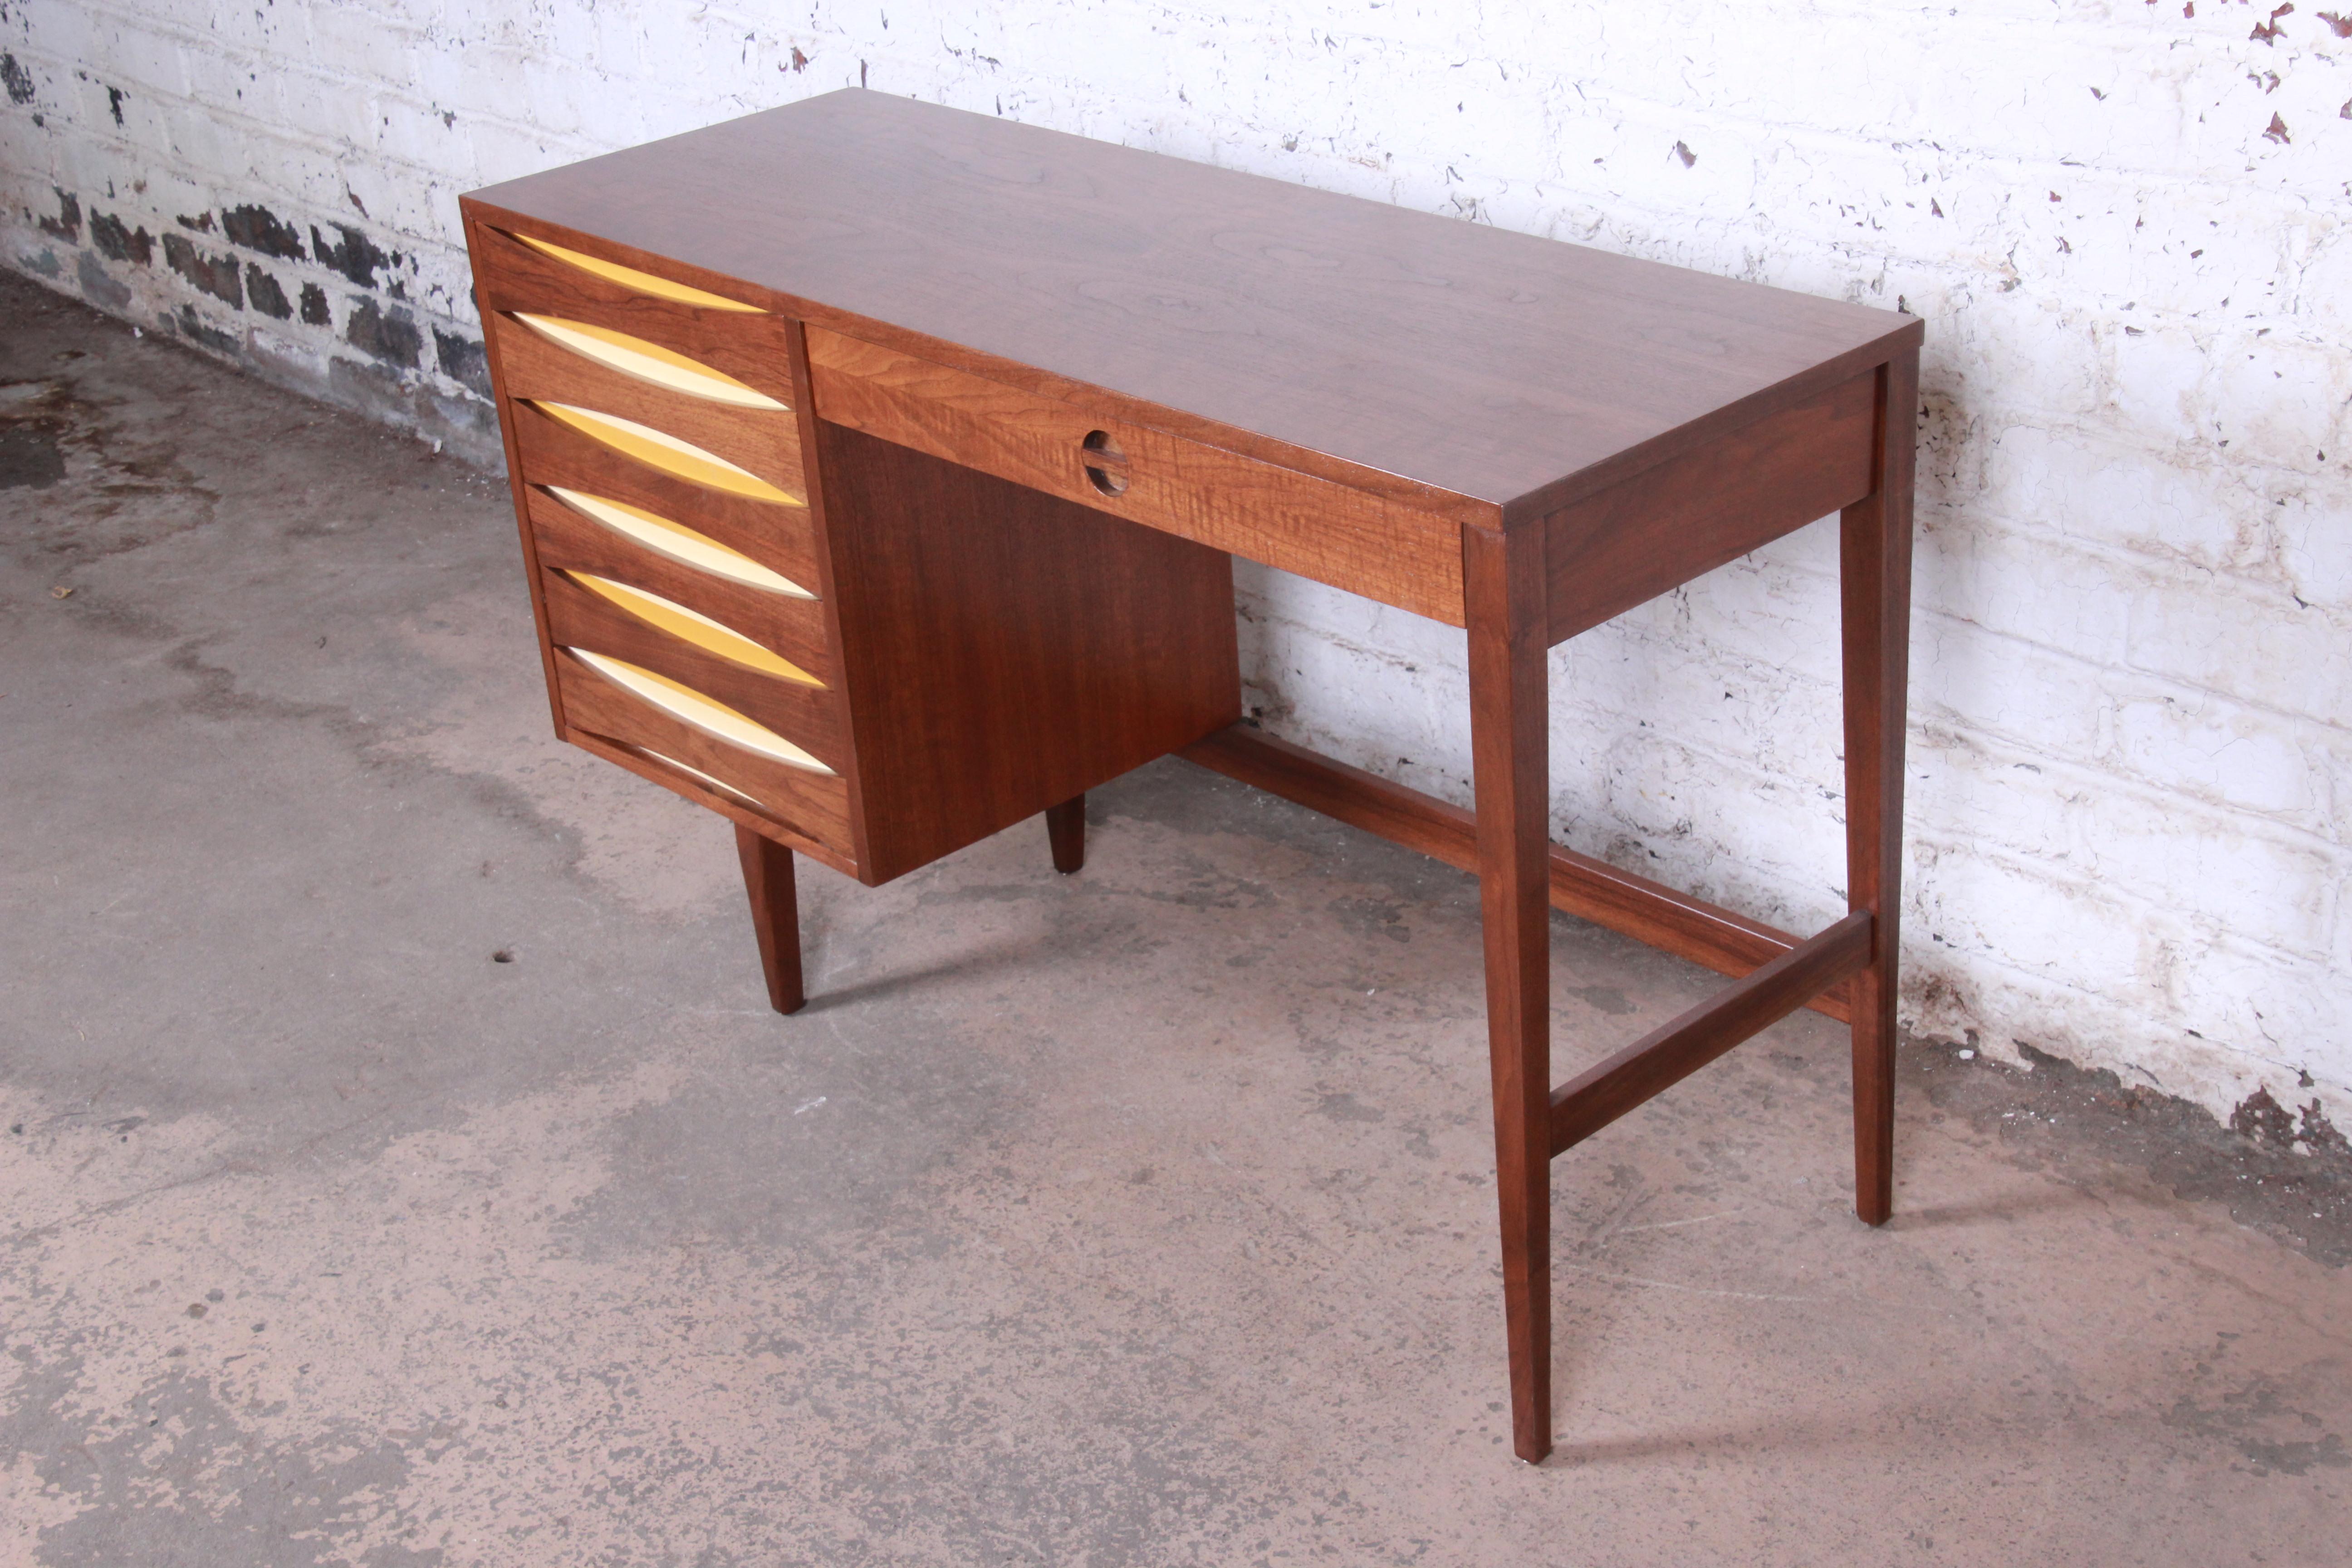 Mid-Century Modern Arne Vodder style walnut writing desk with unique drop-down file drawer

Made by West Michigan Furniture Co.

USA, 1960s

Walnut + lacquer in ivory and marigold

Measures: 48